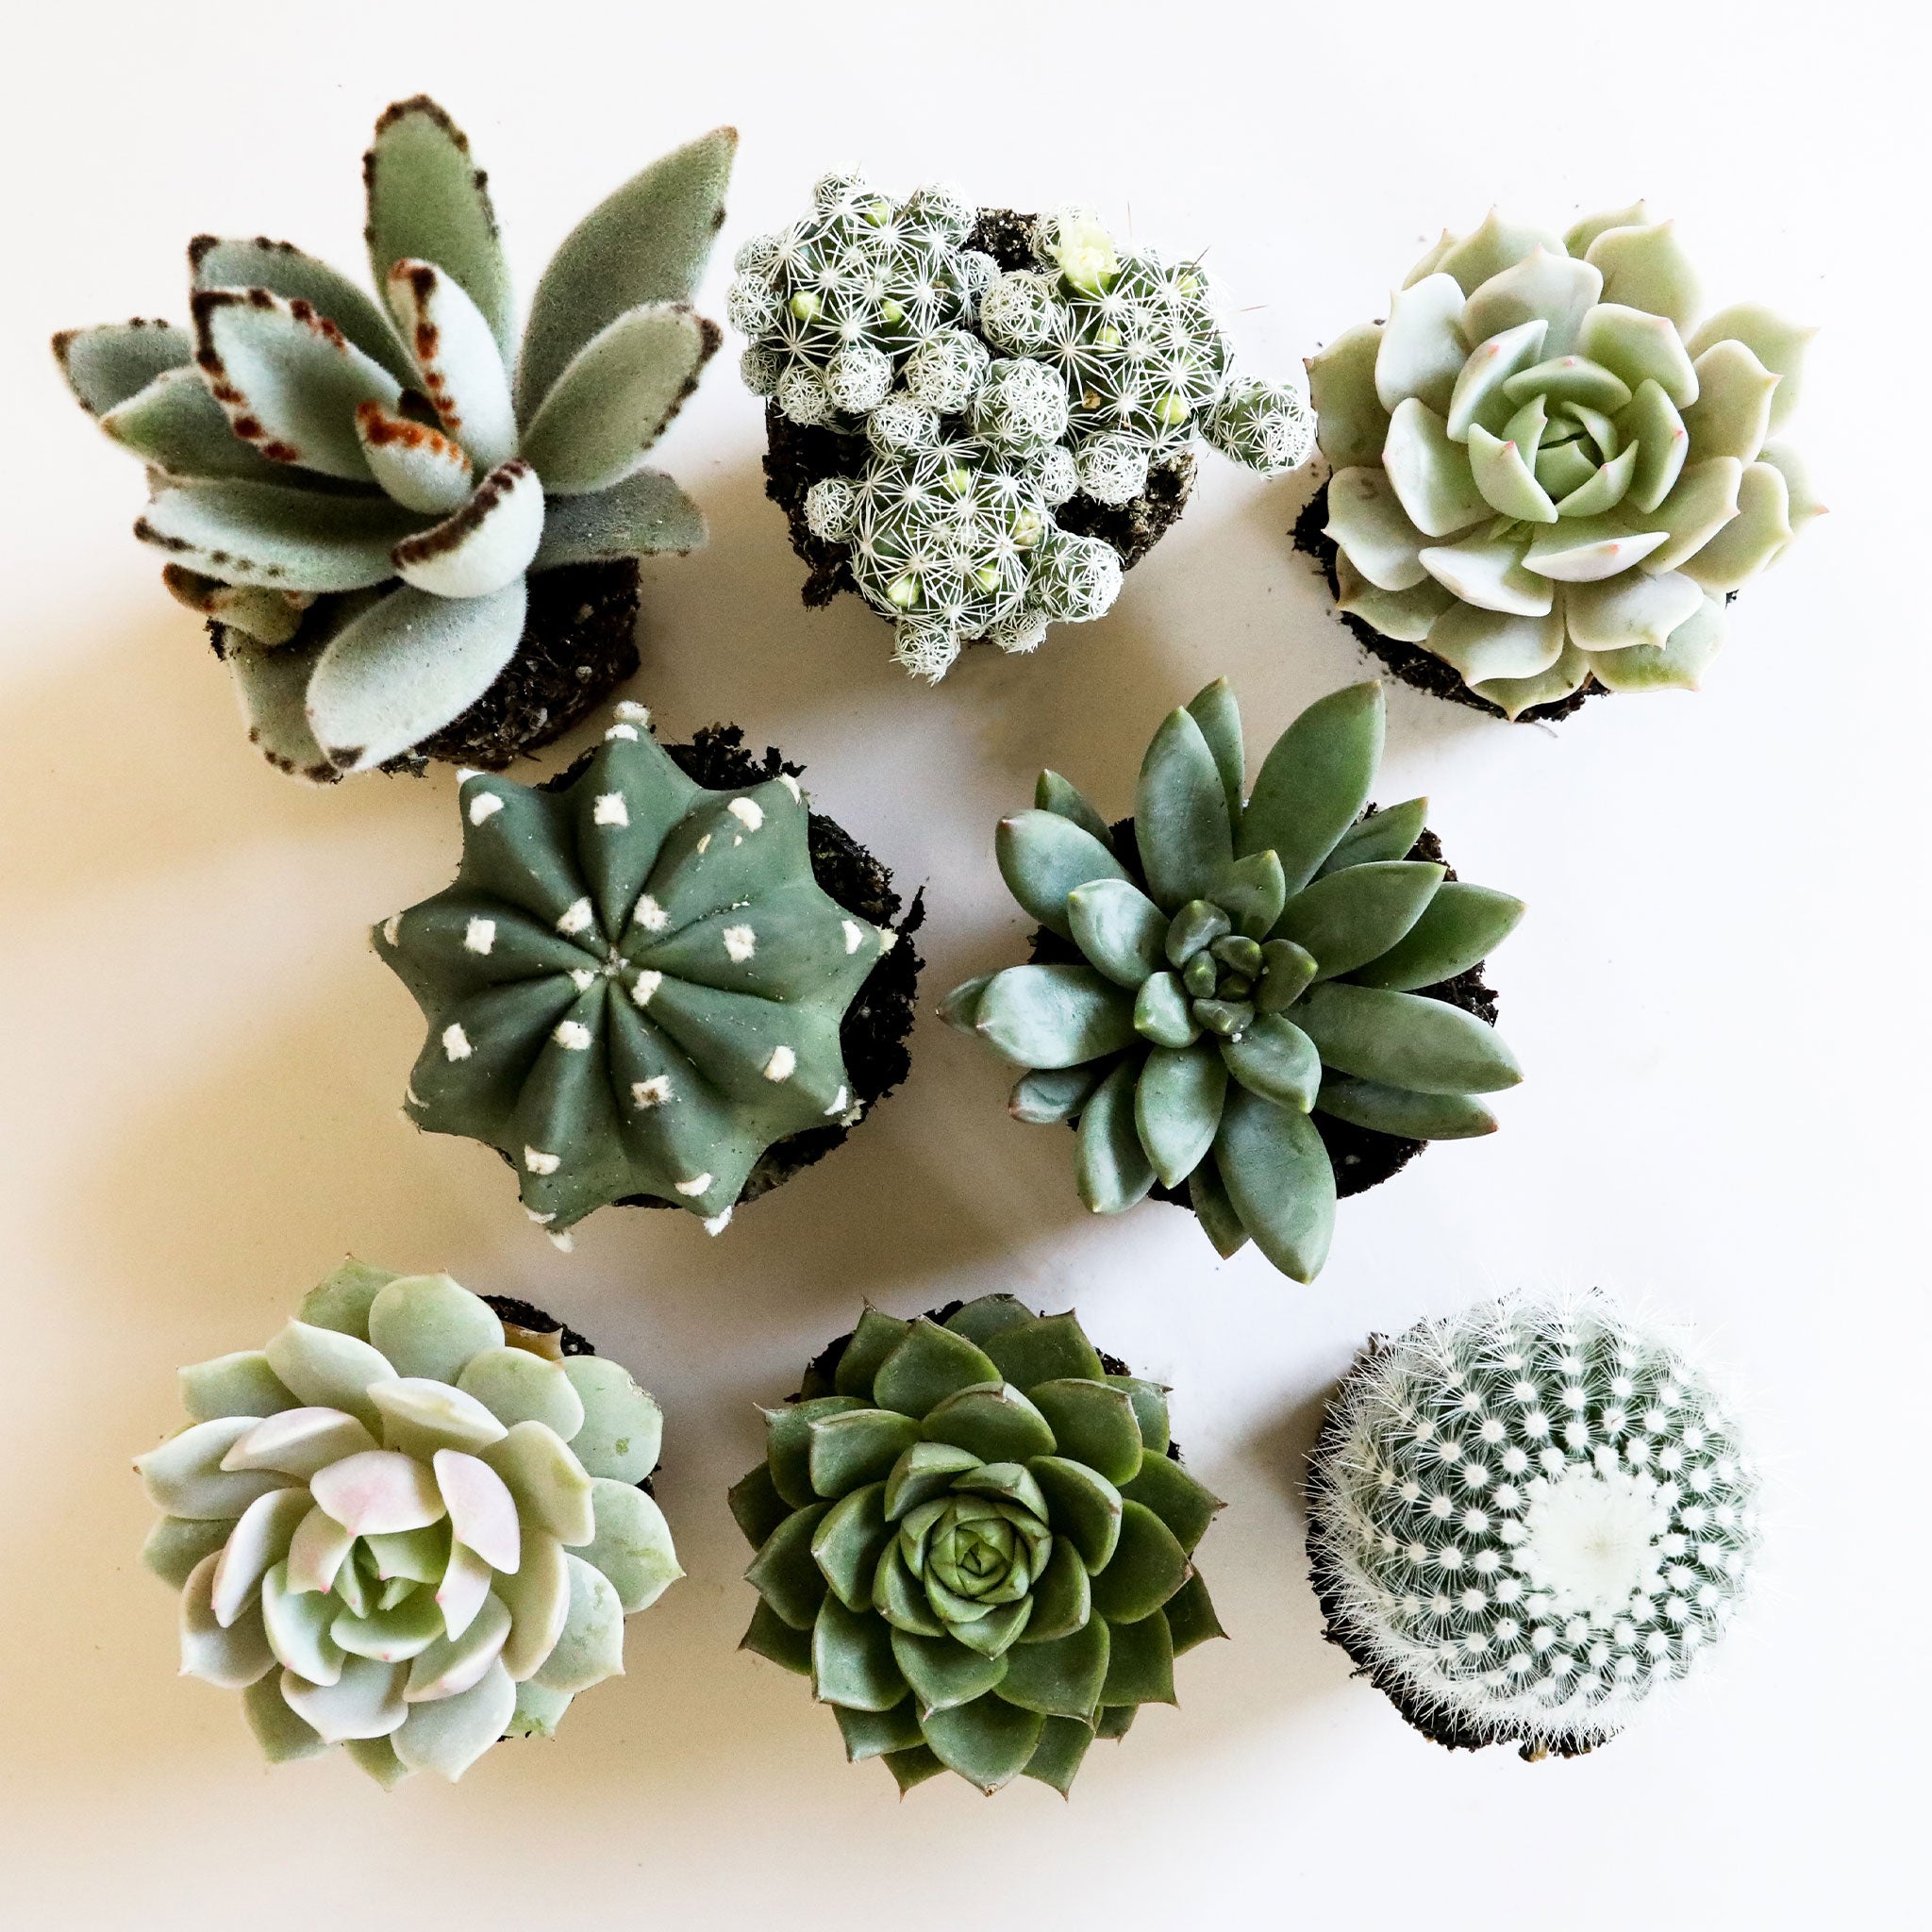 Birds eye view of a white background and eight different cacti and succulents. All of the succulents and cacti are cool tones; white and different shades of green.